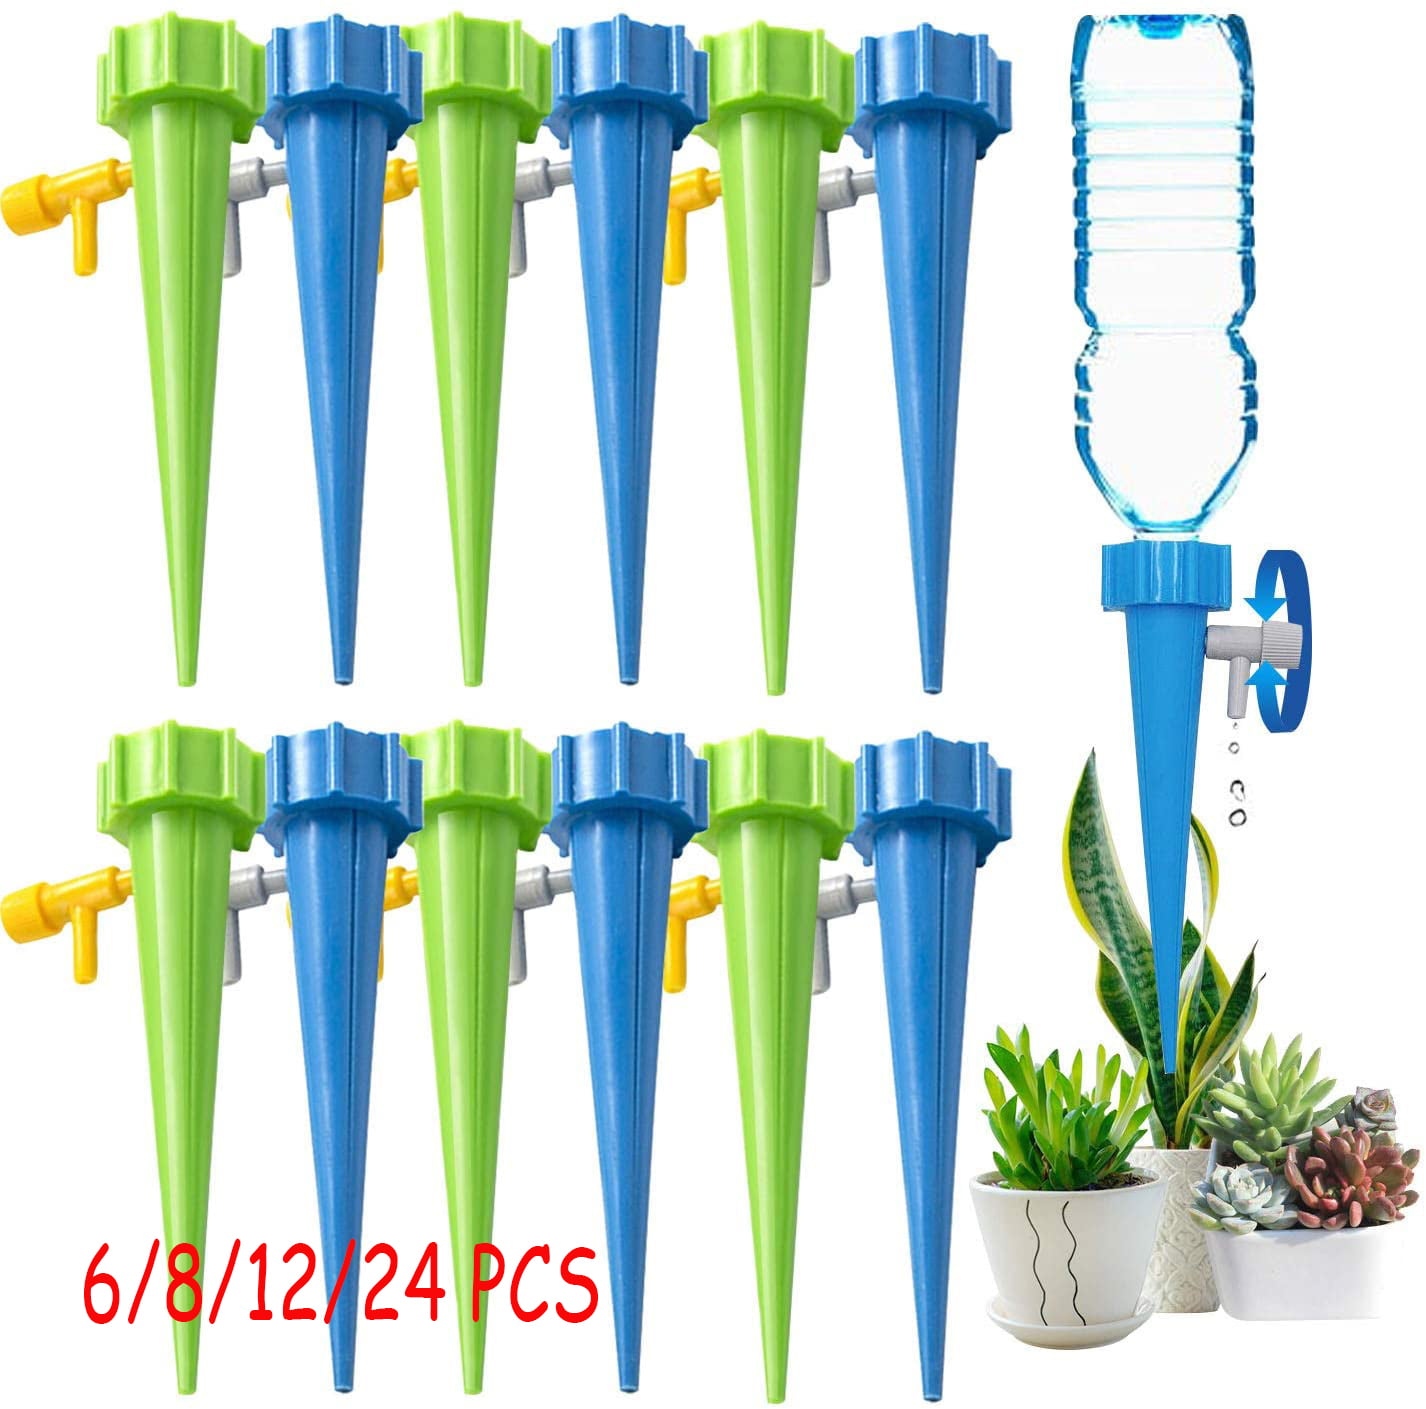 15 Pack/Set Self Watering Spikes with Slow Release Control Valve Switch Self Irrigation Watering Drip Devices for Potted Plants Flower Vegetables Nanny HARDER Plant Watering Spikes 